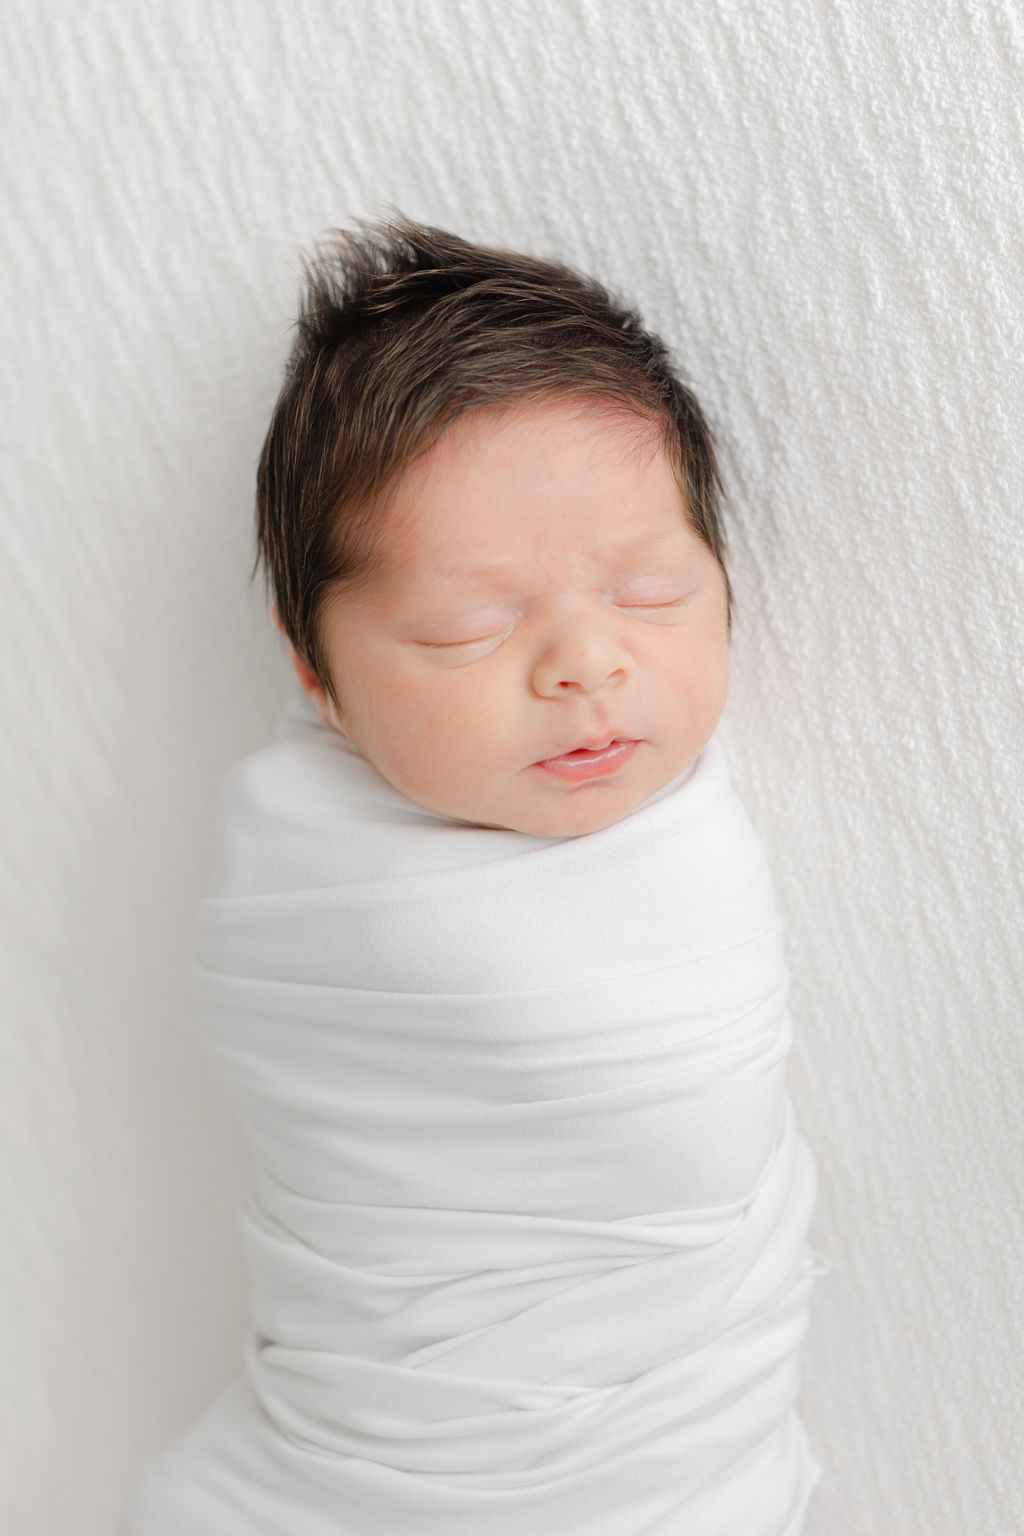 A newborn baby sleeps in a white swaddle on a white bed